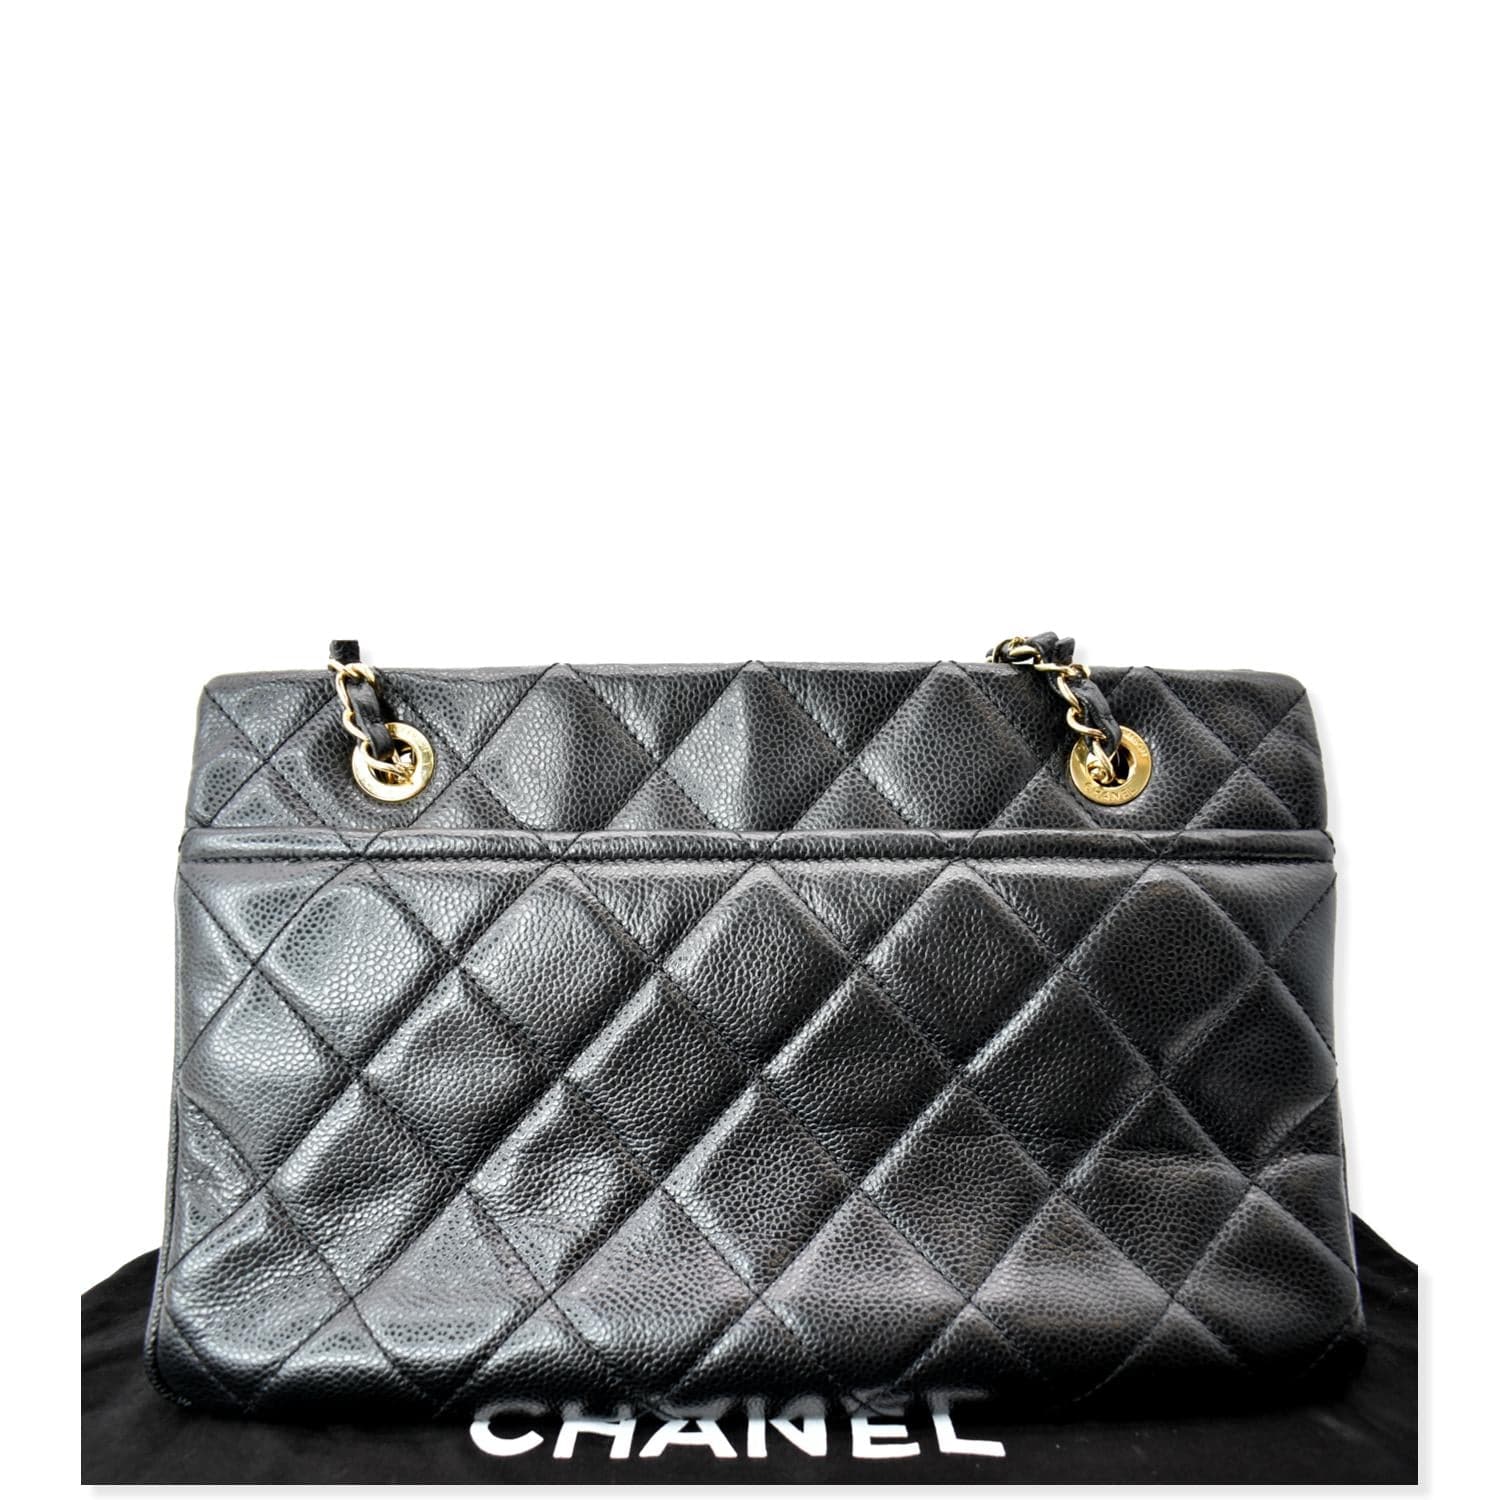 Chanel Pre-owned 2013-2014 Boy Tote Bag - Black